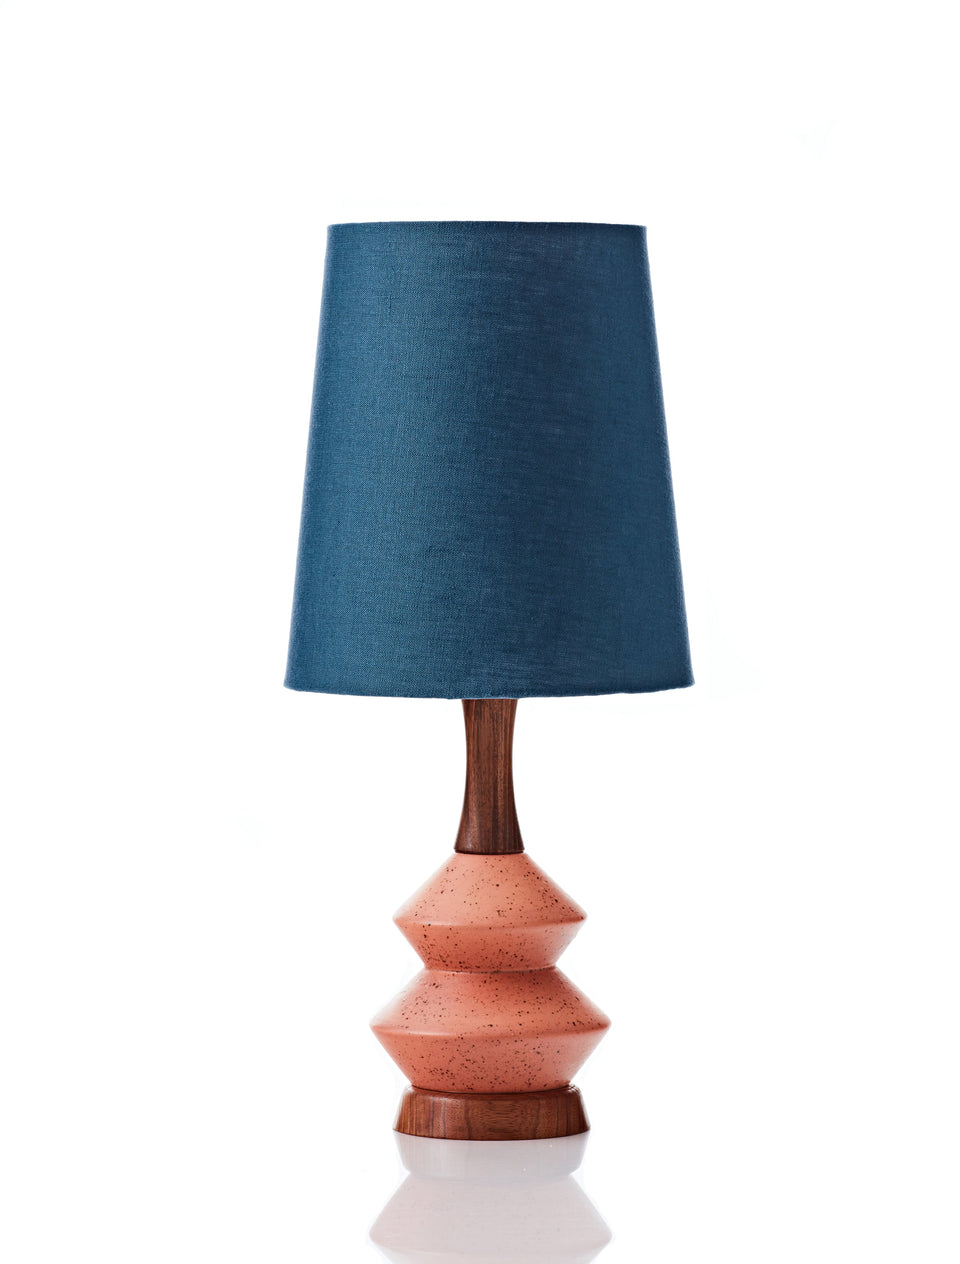 Athena Lamp • Small - Teal Linen - SALE